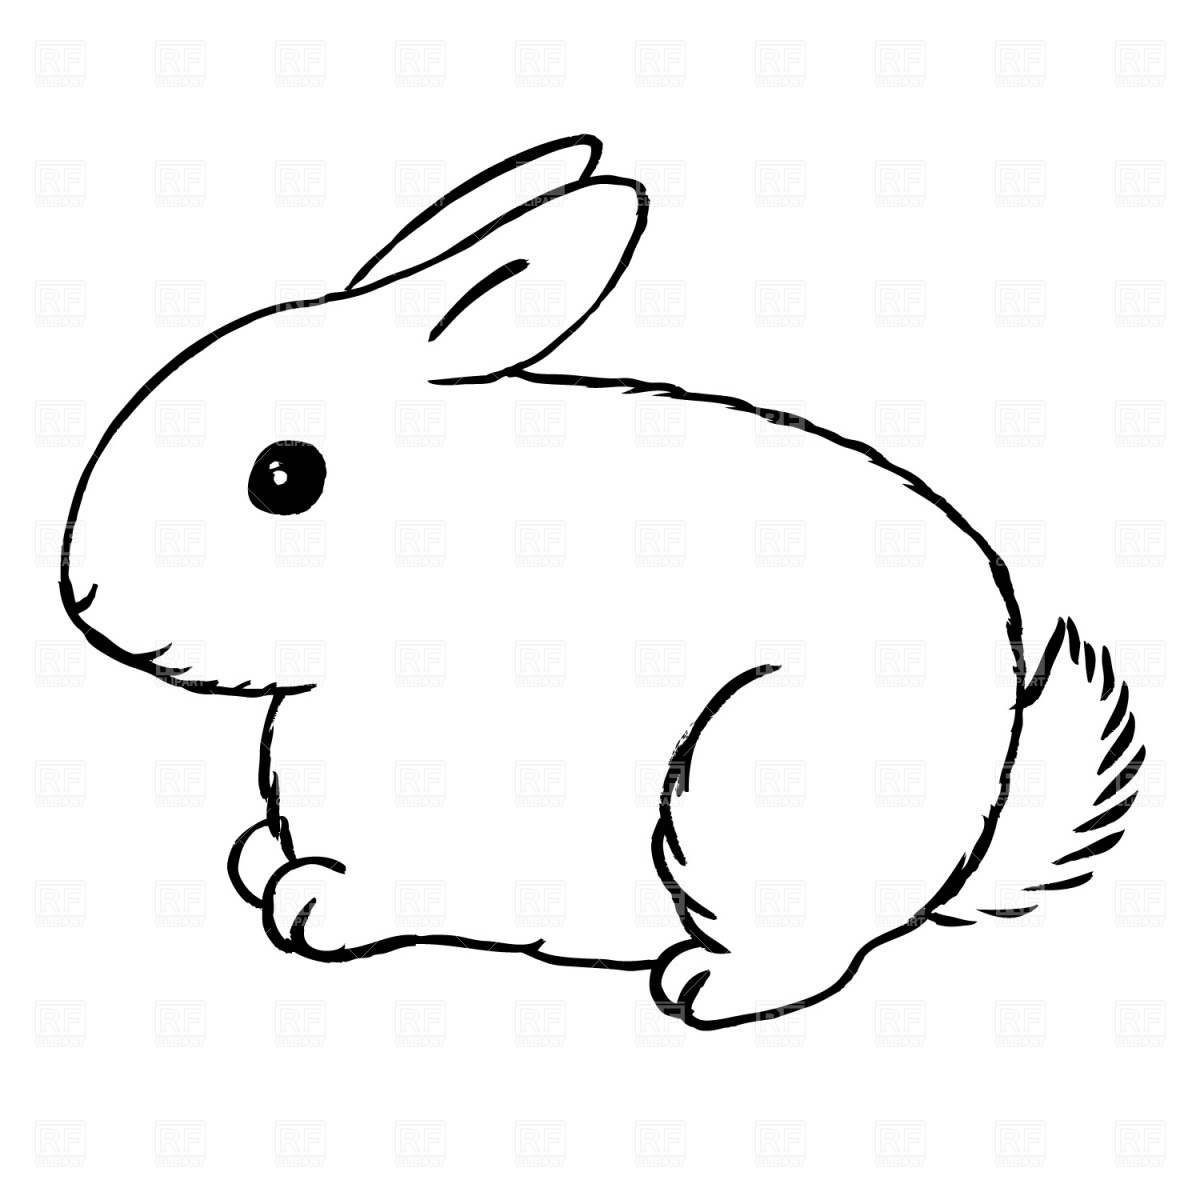 Bunny  black and white cute rabbit clipart black and white